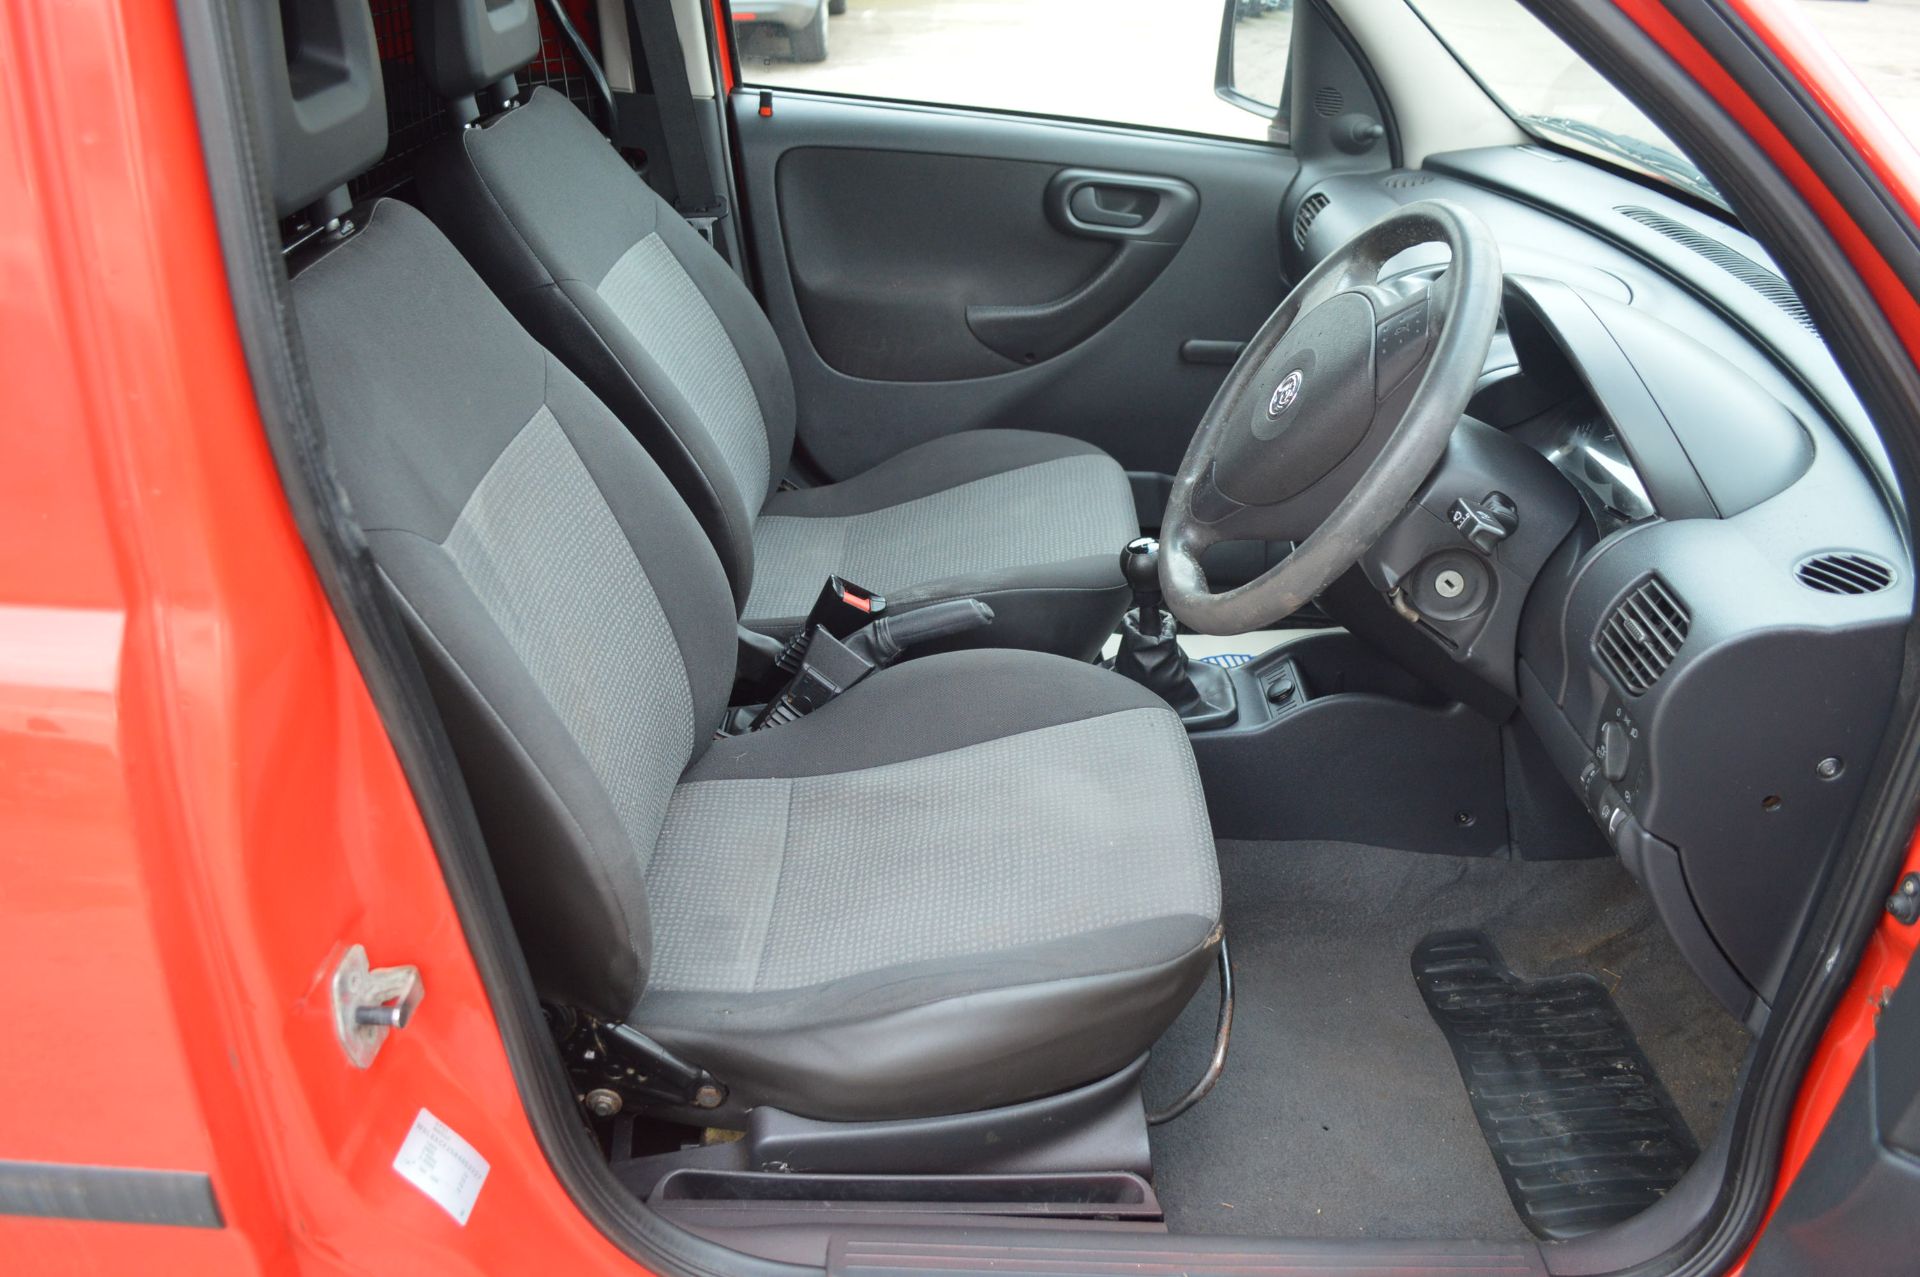 2008/57 REG VAUXHALL COMBO 1700 CDTI, SHOWING 1 OWNER FROM NEW *NO VAT* - Image 12 of 16